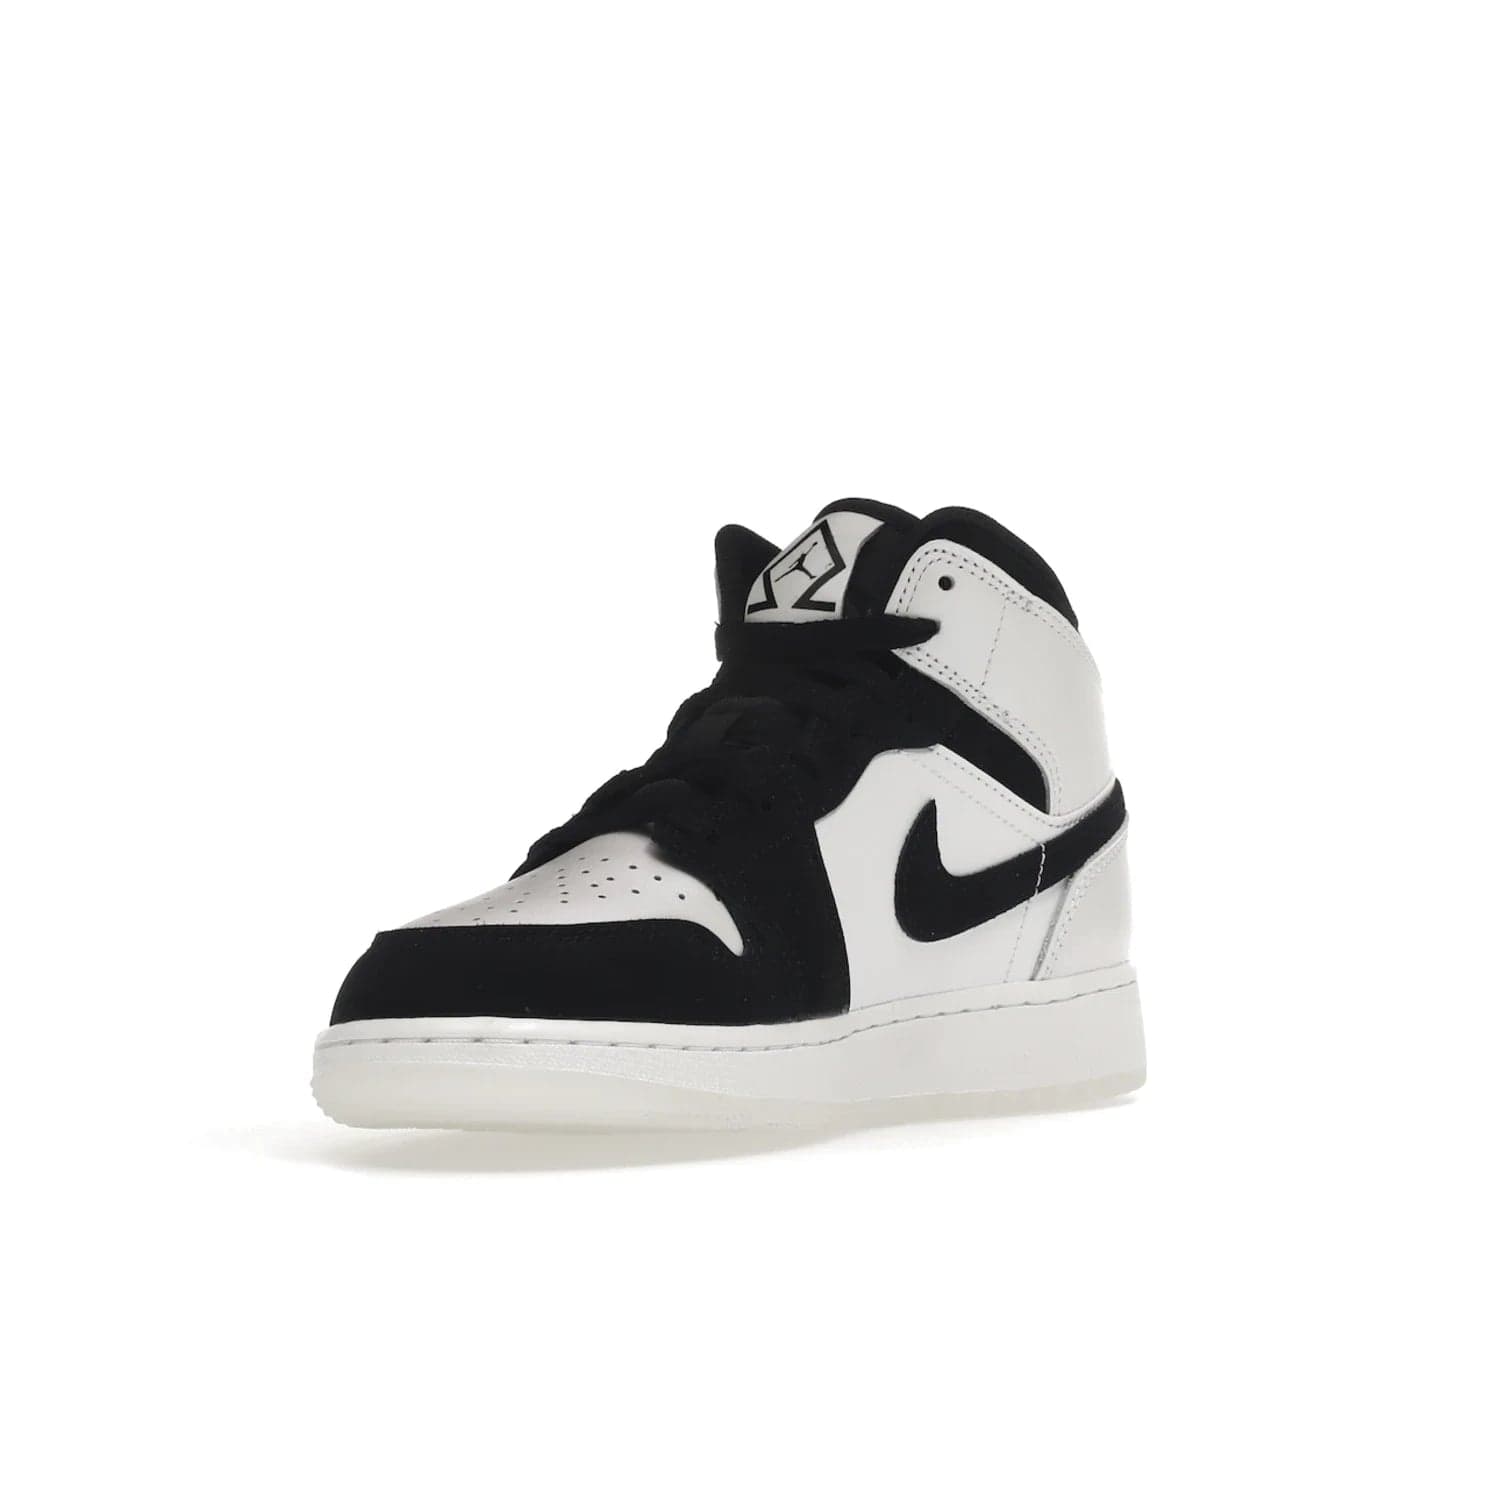 Jordan 1 Mid Diamond Shorts (GS) - Image 14 - Only at www.BallersClubKickz.com - Get the Jordan 1 Mid Diamond Shorts GS on 9th Feb 2022! Features a white, black & suede design with nylon tongue, stamped wings logo, rubber midsole & outsole. Only $100!